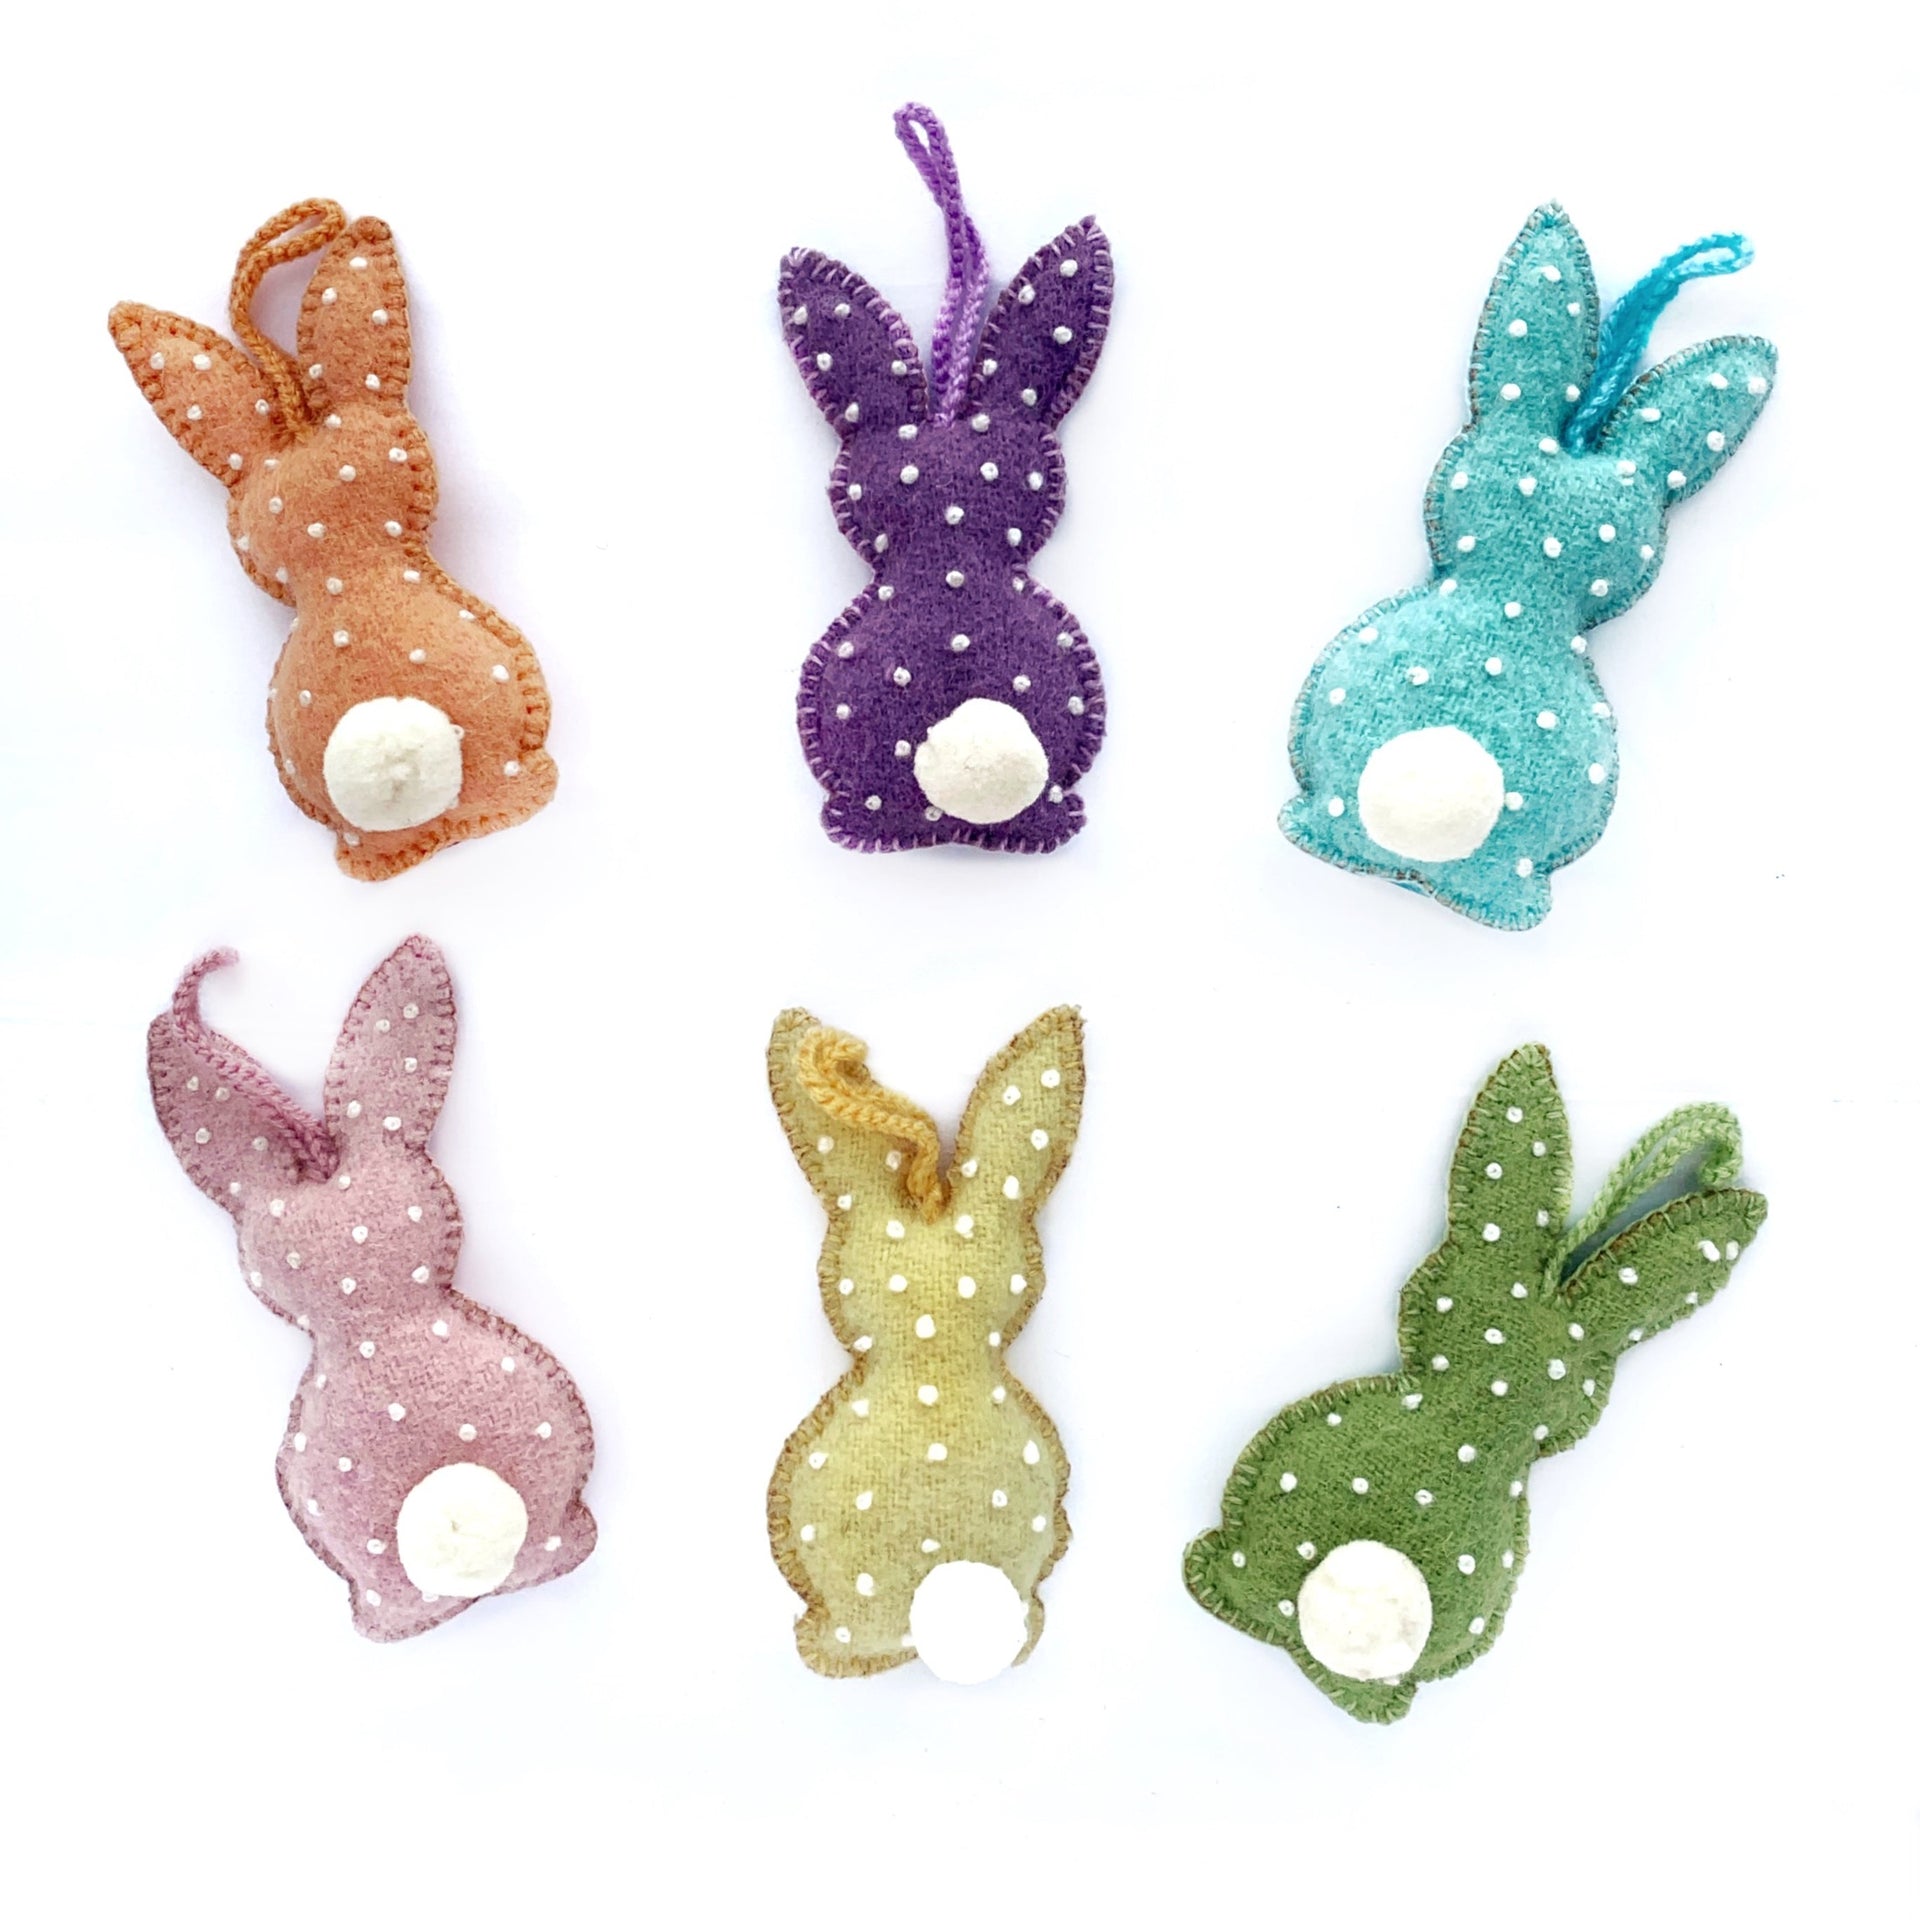 Set of six handmade embroidered Easter Bunny Ornaments in pastel colors.